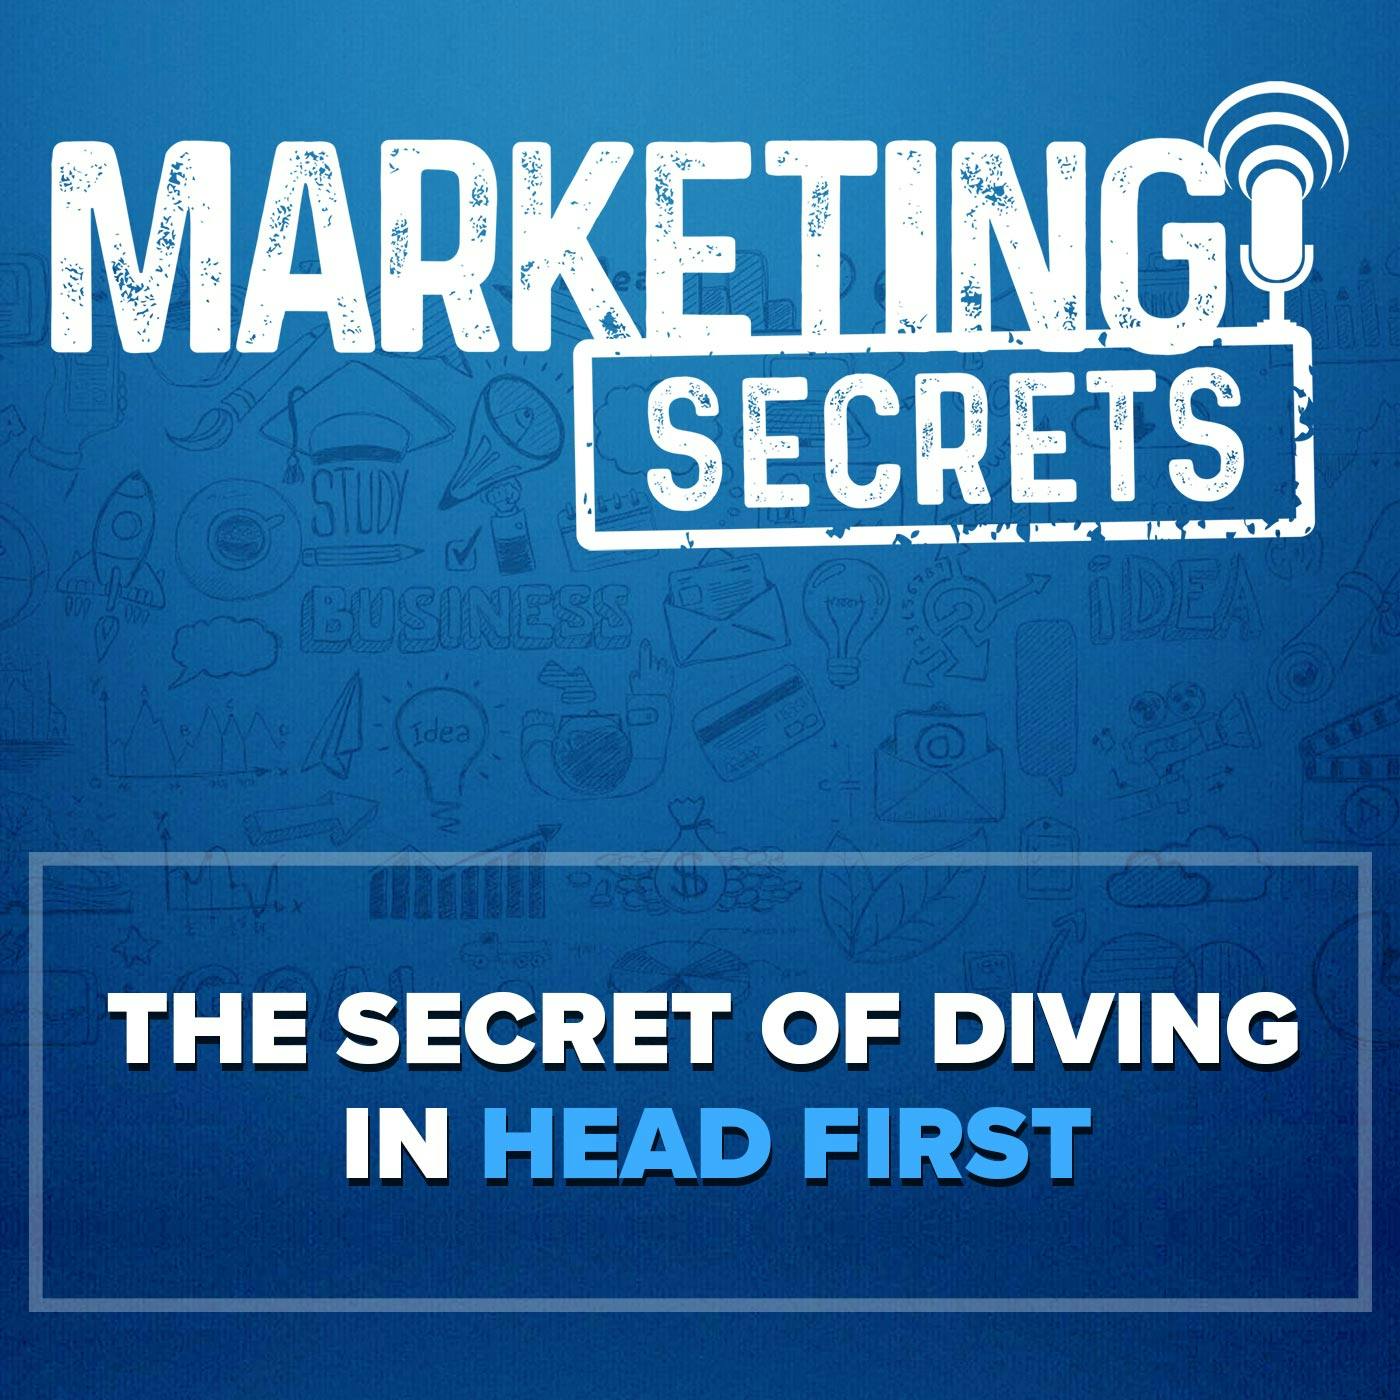 The Secret of Diving In Head First by Russell Brunson